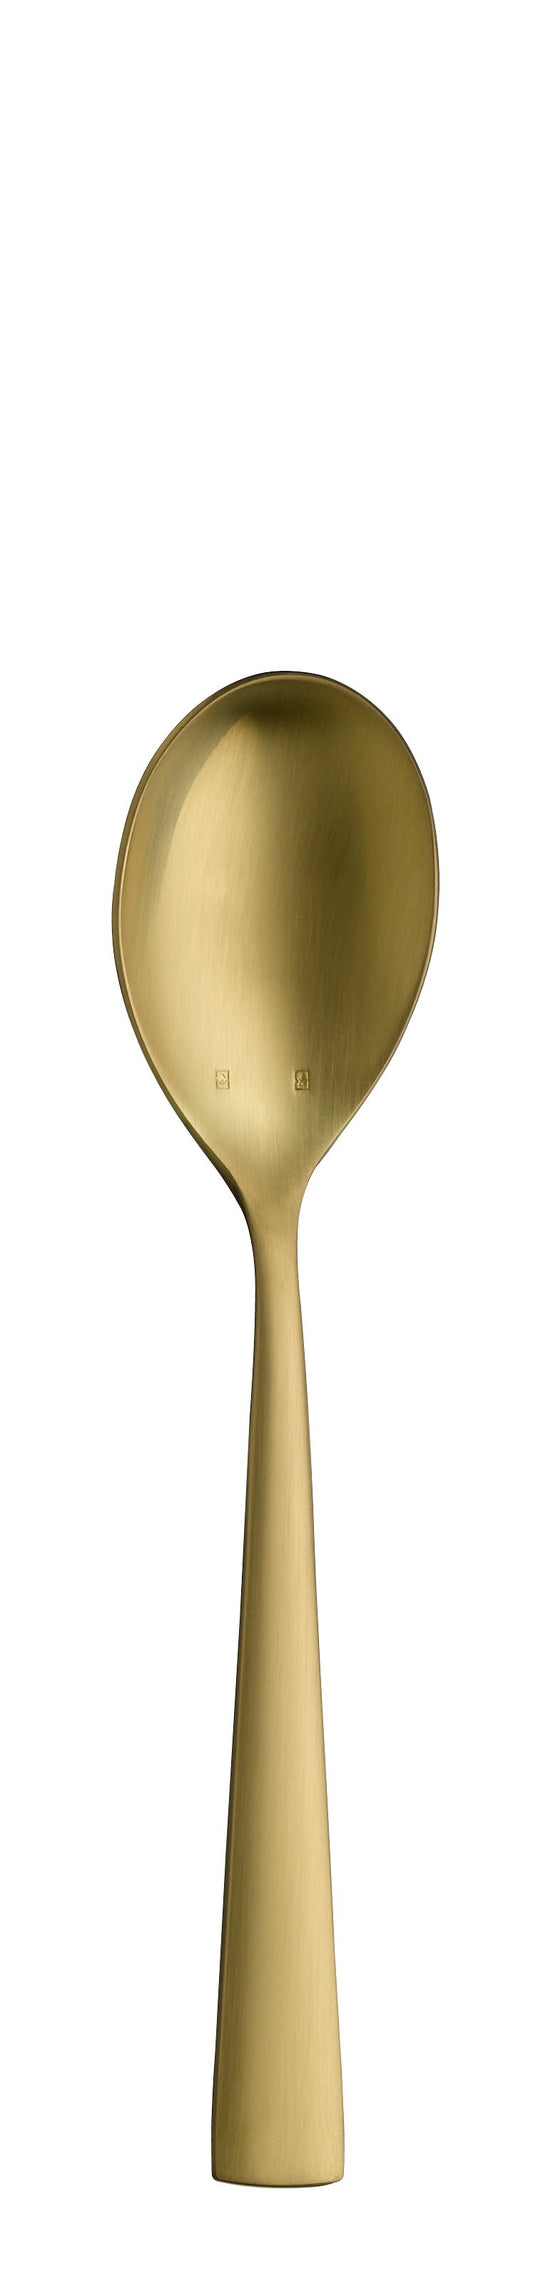 Dessert spoon ACCENT PVD gold brushed 180mm